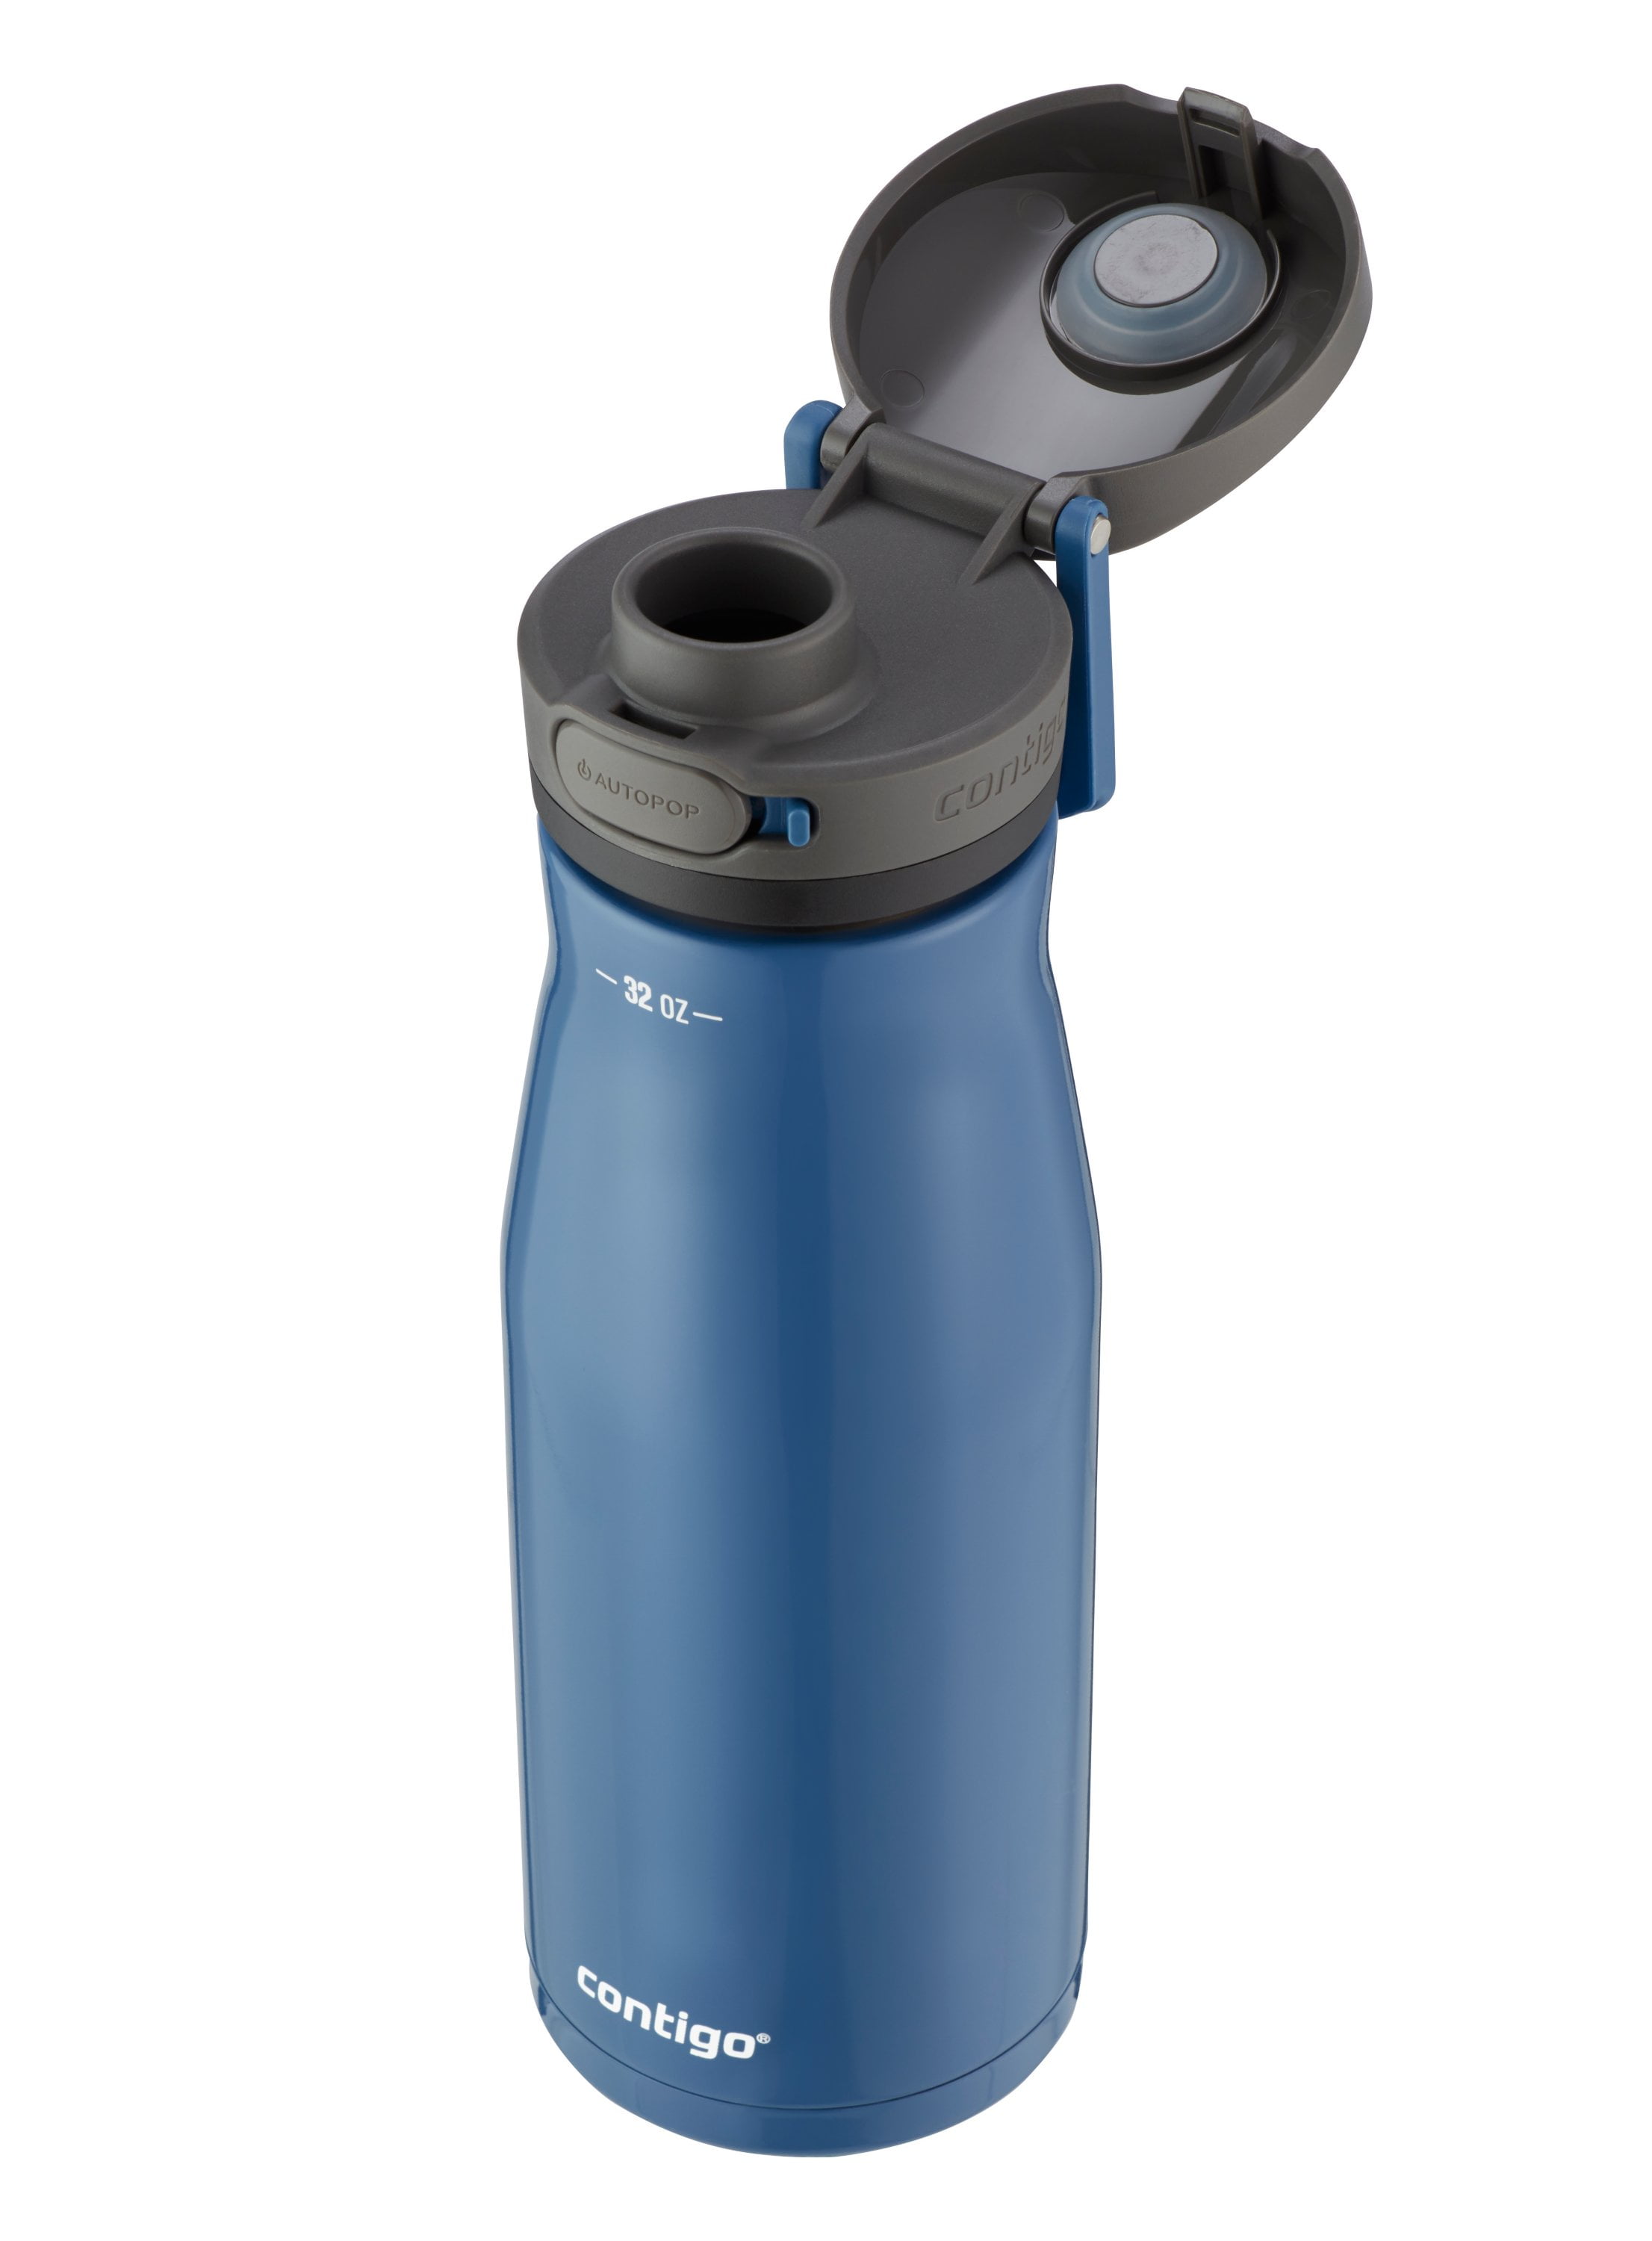 Contigo Jackson Chill 2.0 Stainless Steel Water Bottle with Autopop Wide  Mouth Lid Blue, 32 fl oz. 